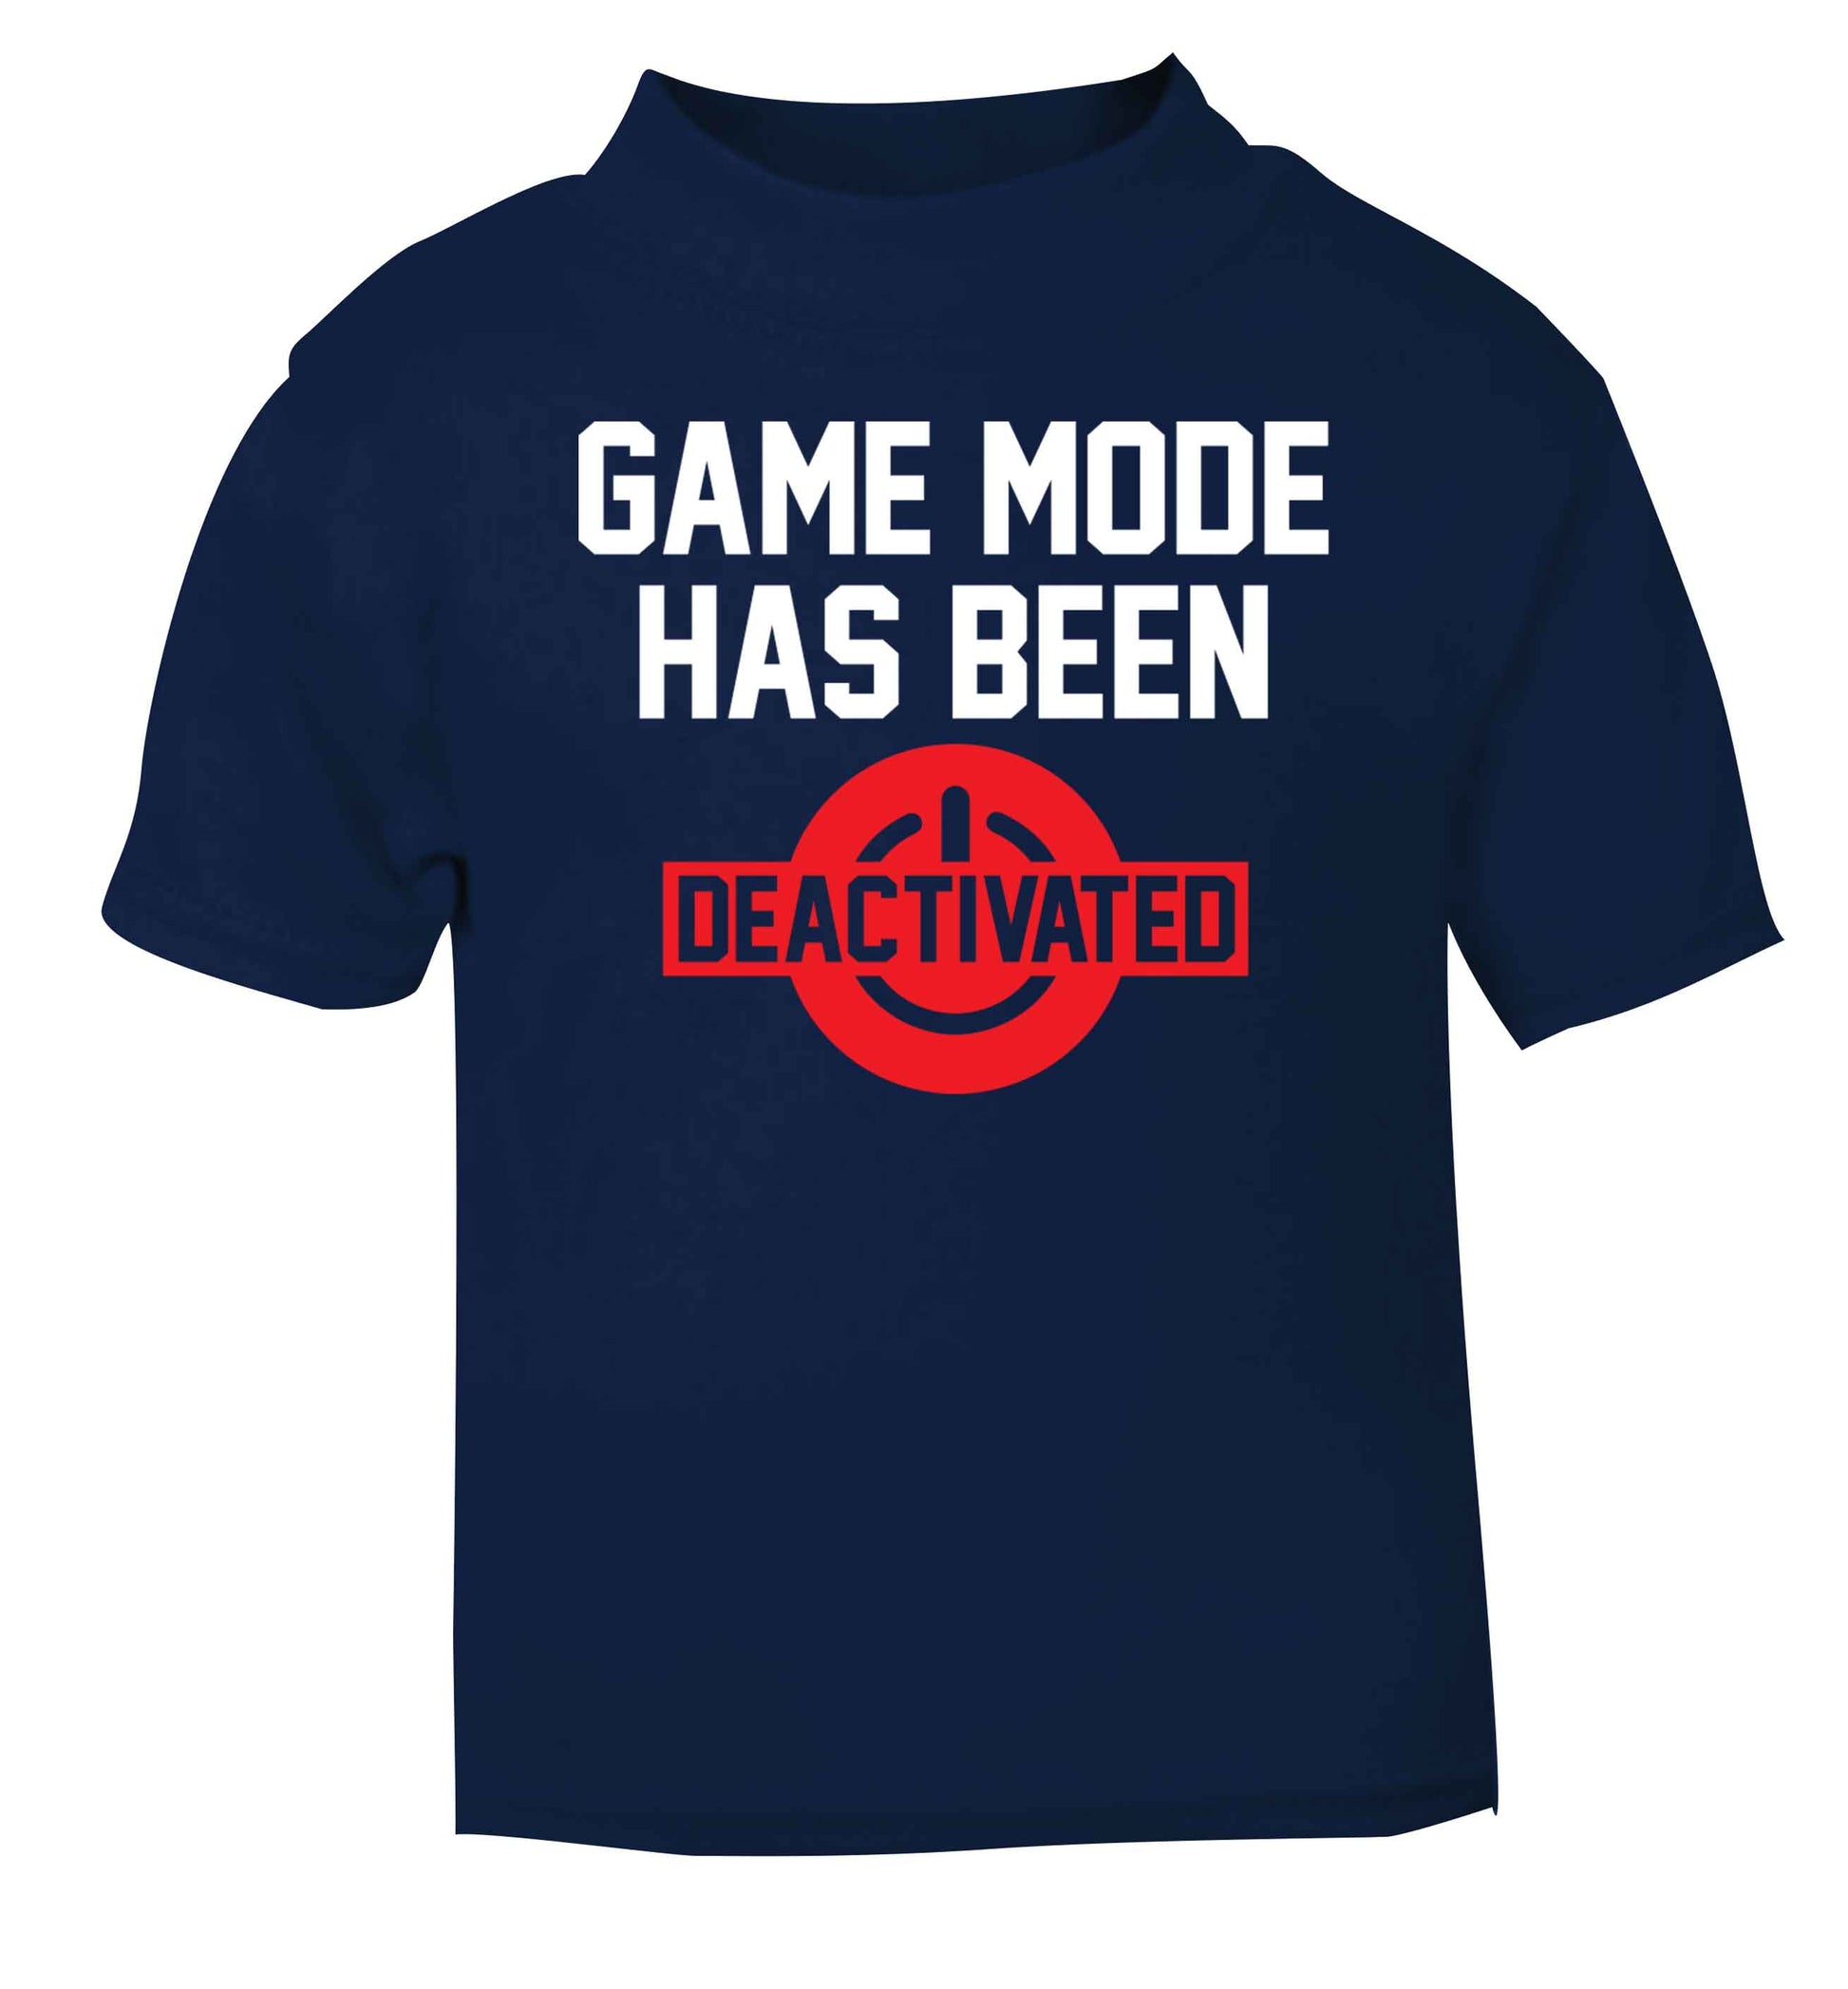 Game Mode Has Been Deactivated navy baby toddler Tshirt 2 Years